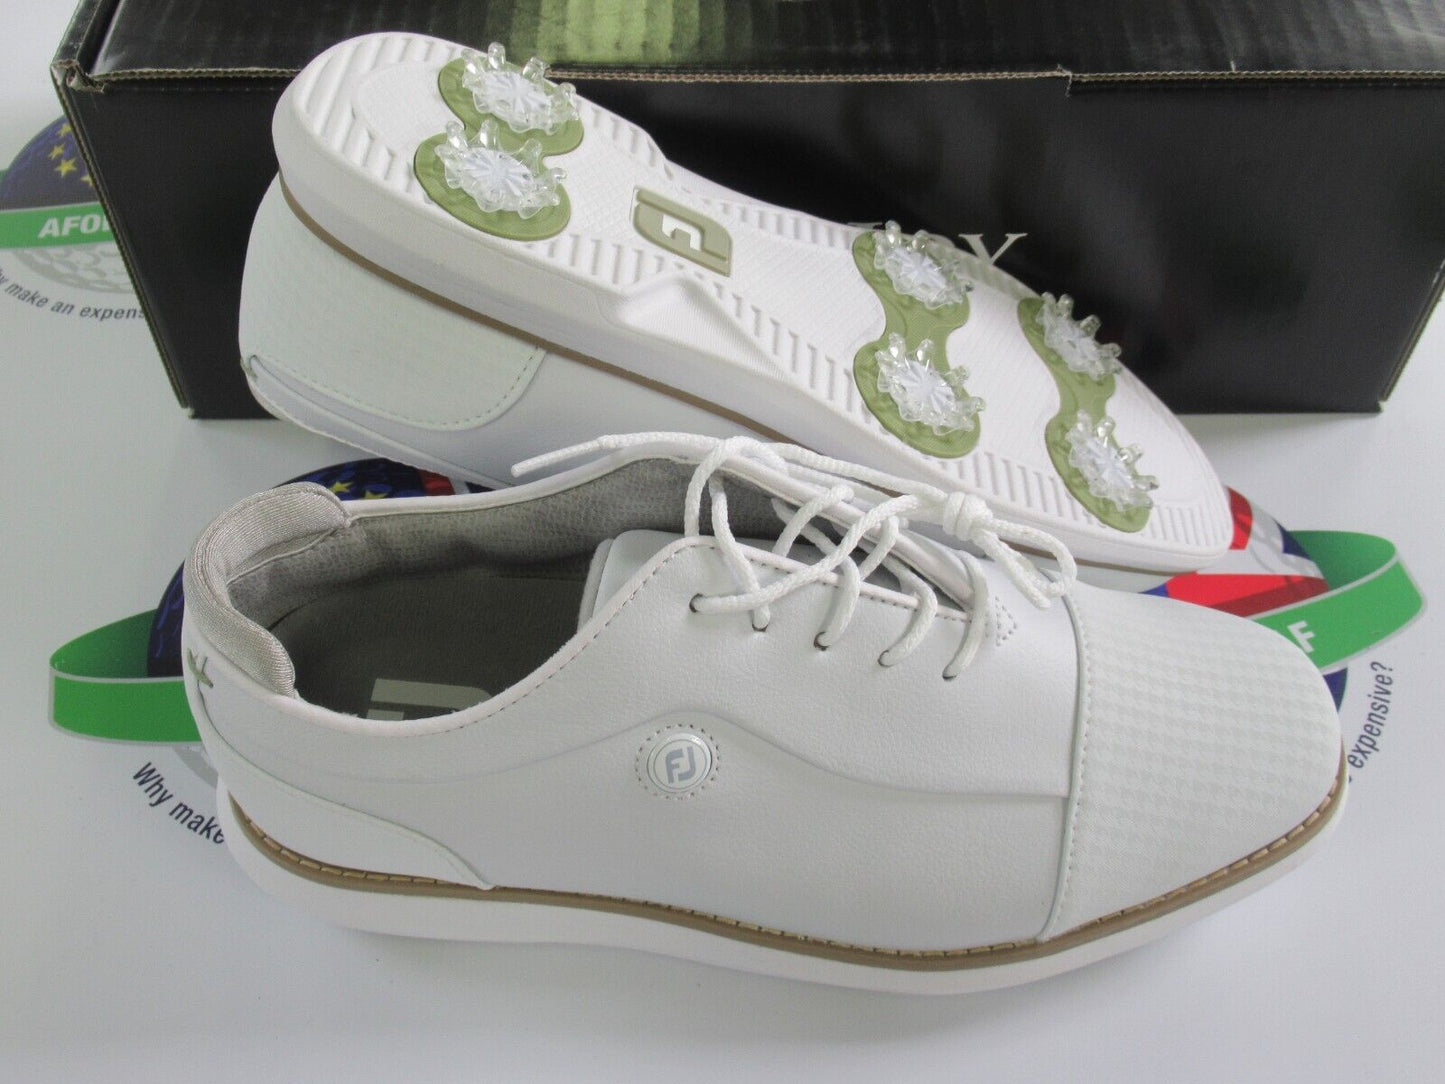 footjoy fj traditions womens golf shoes 97914k white uk size 7.5 wide/large